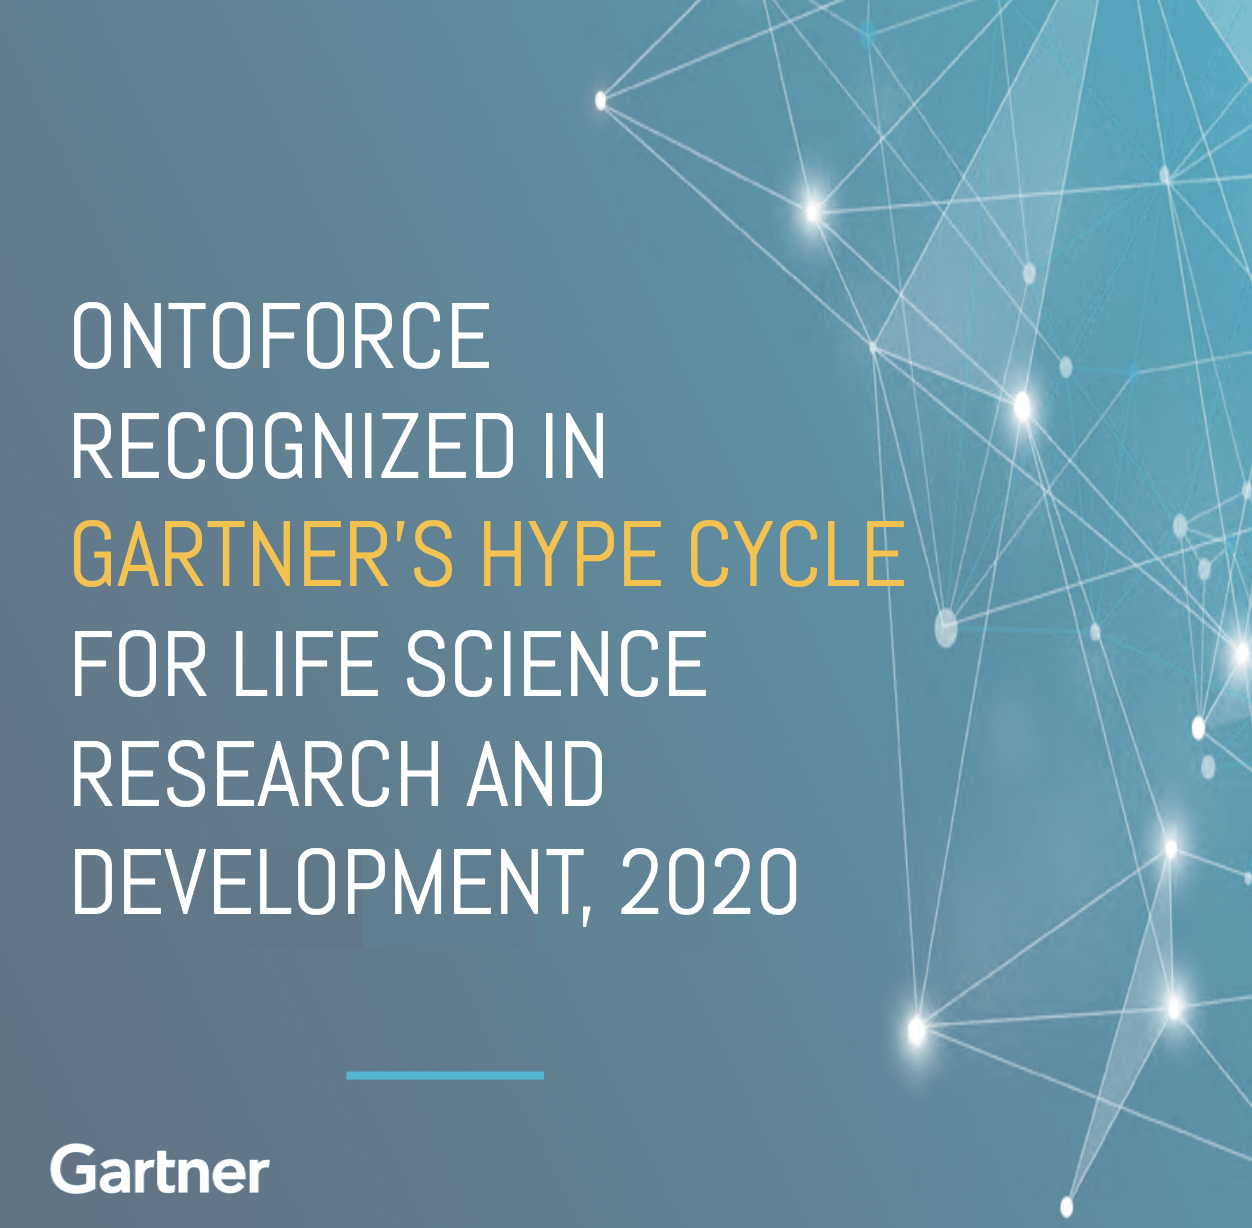 ONTOFORCE recognized in Gartner’s Hype Cycle for Life Science Research and Development, 2020